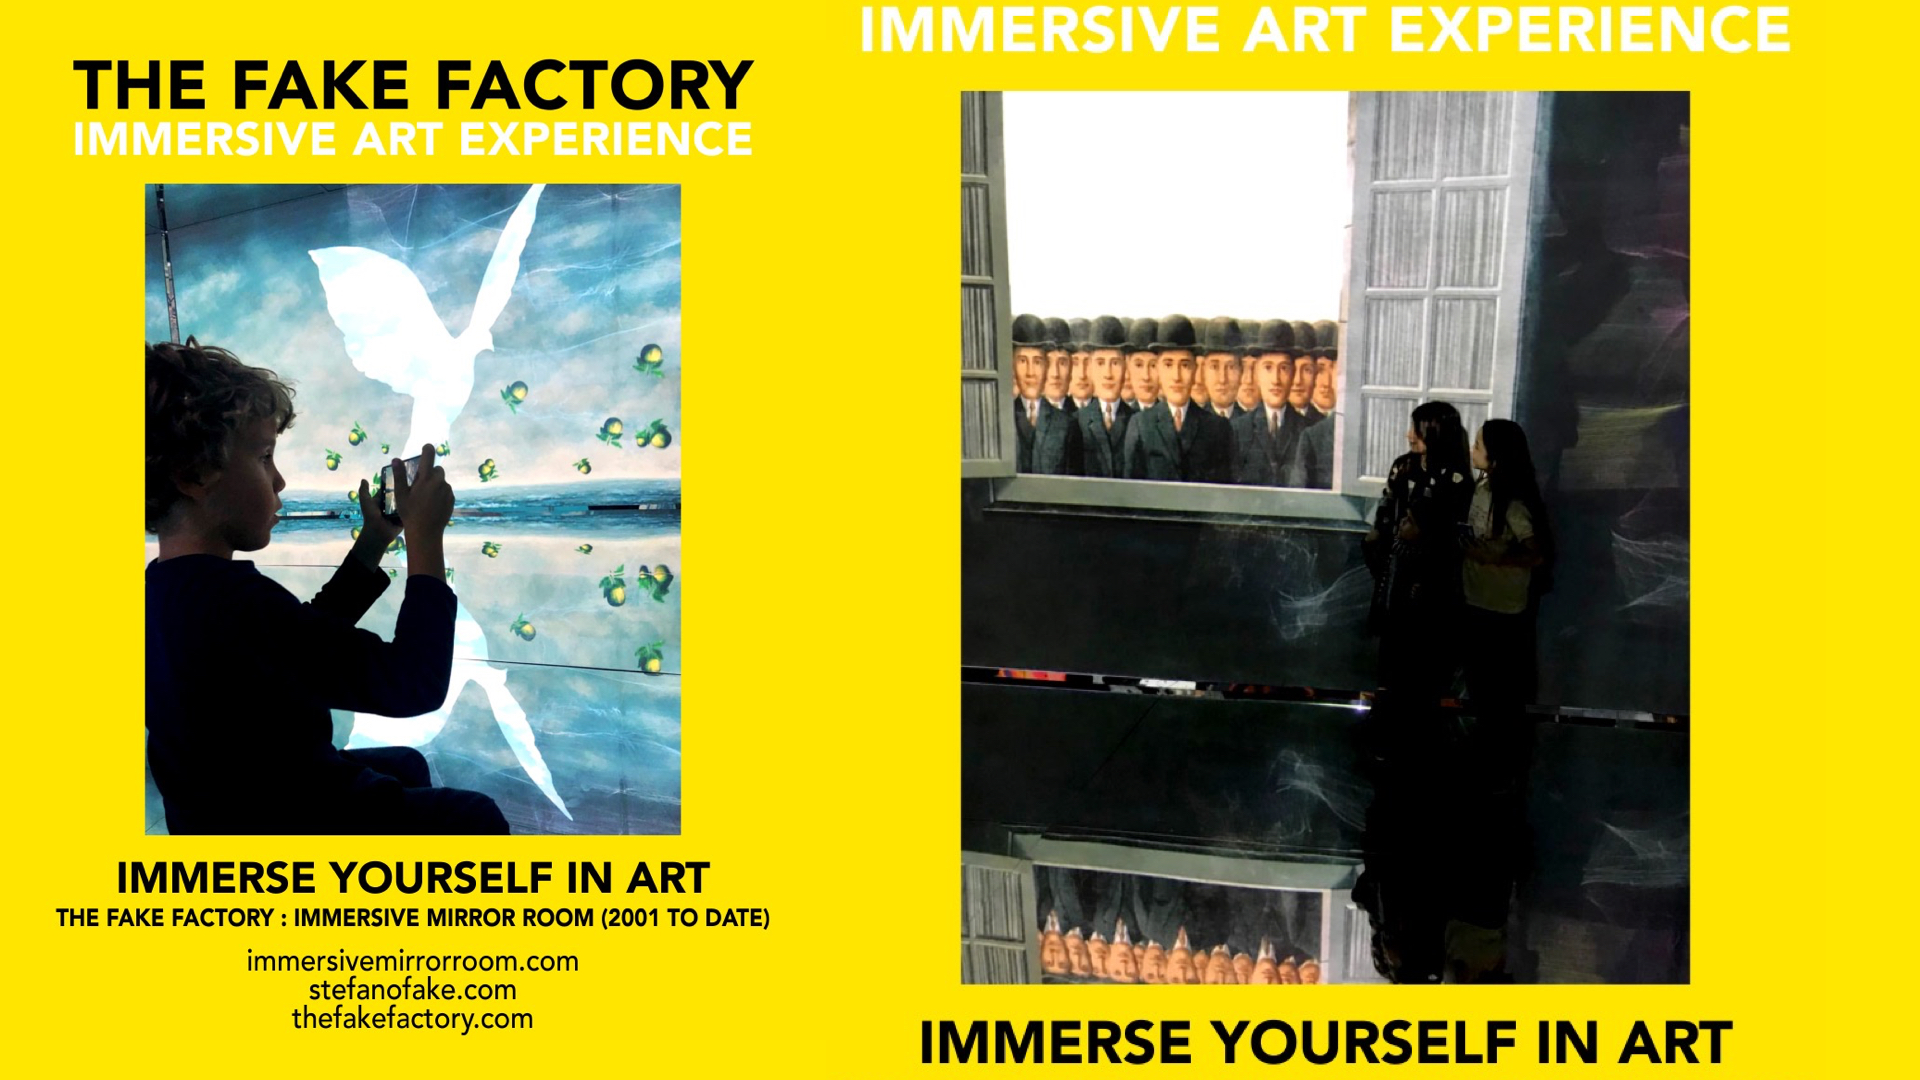 THE FAKE FACTORY IMMERSIVE ART EXPERIENCE 2012-2020 FORMAT.125